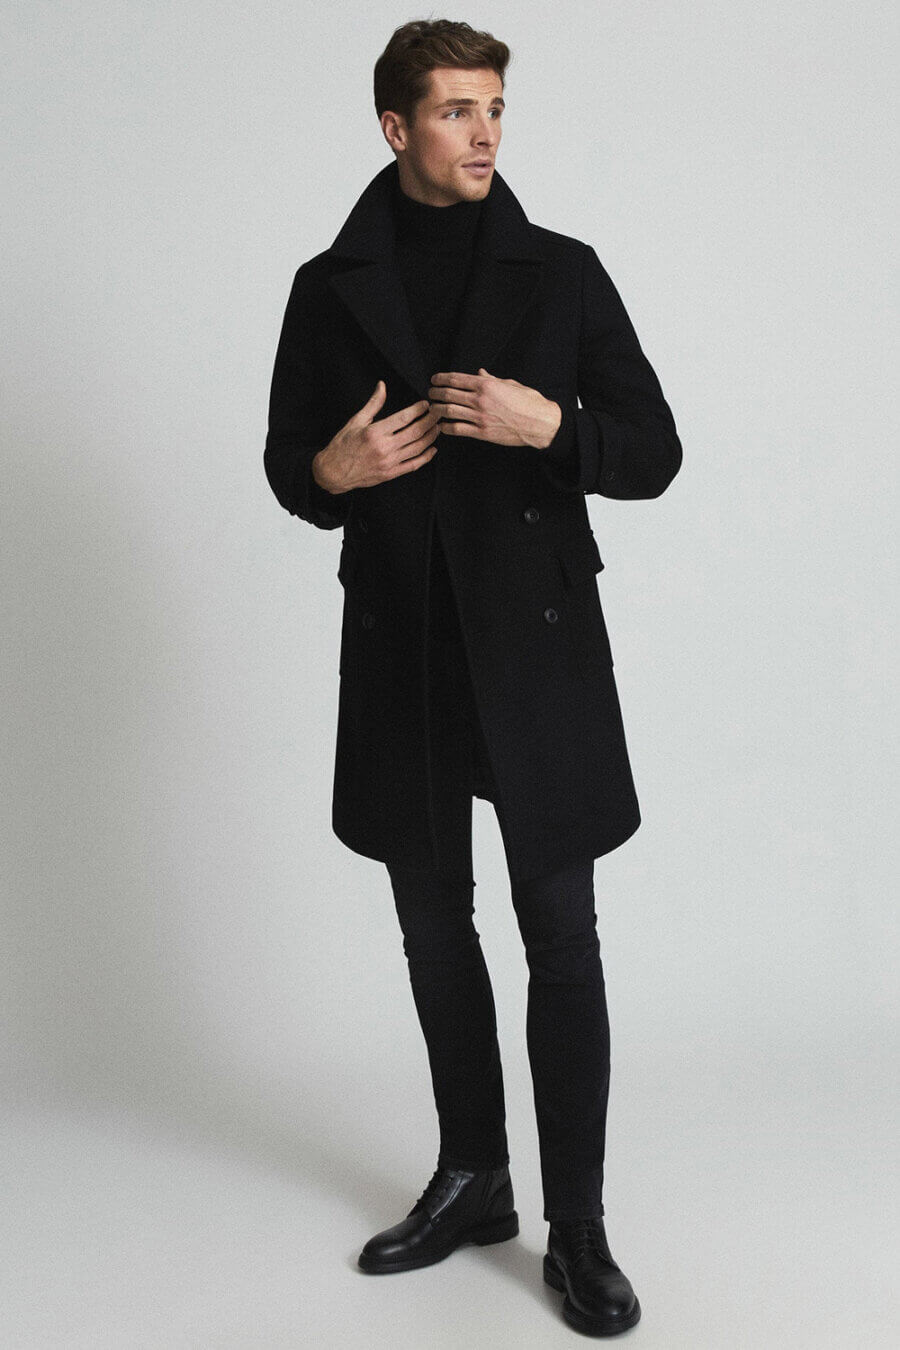 Men's smart all black outfit of turtleneck, jeans and overcoat with leather boots